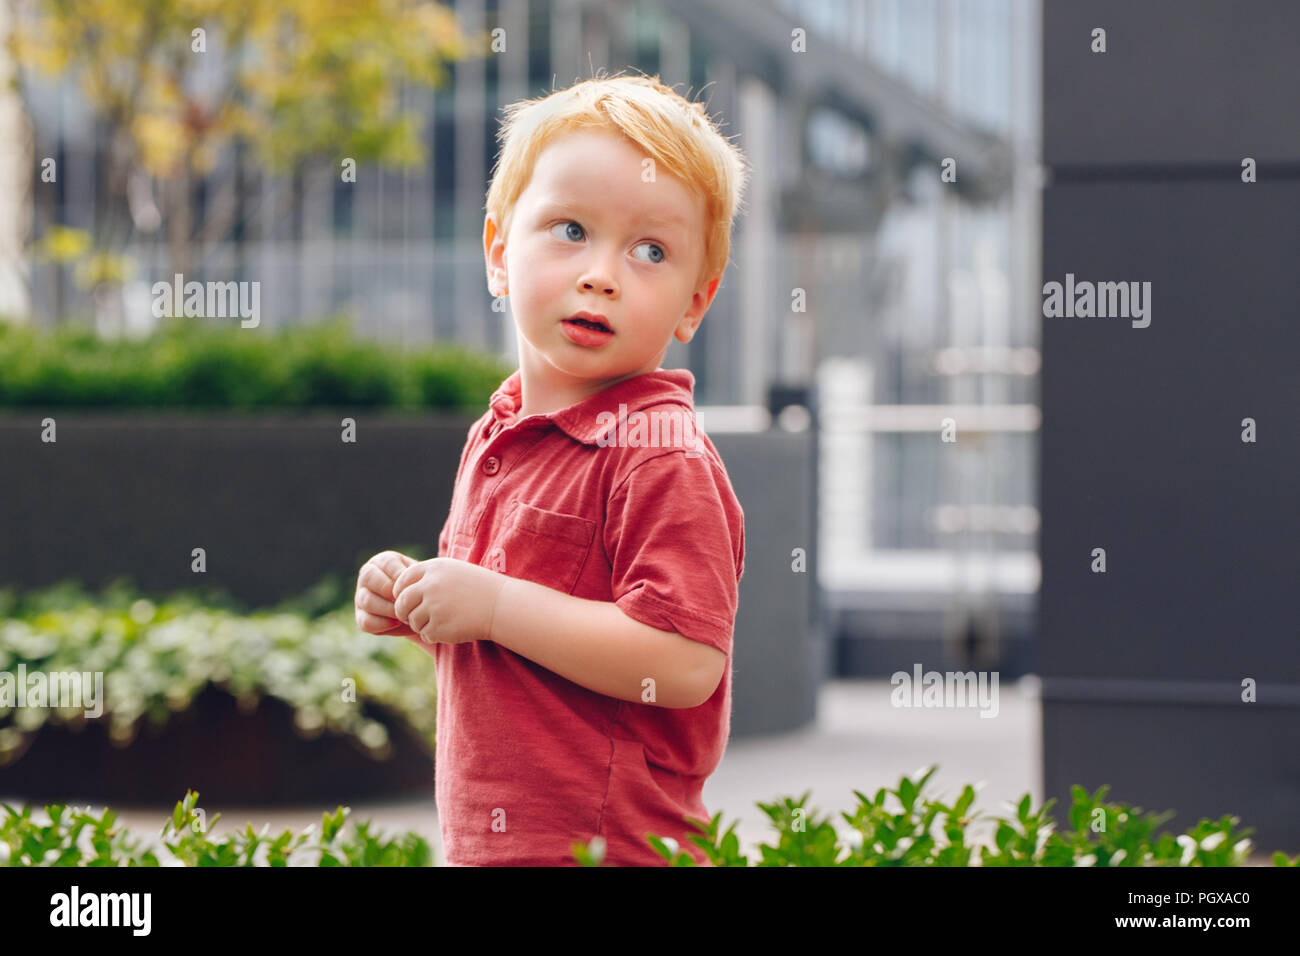 Closeup portrait of cute adorable little red-haired Caucasian boy child in red t-shirt standing in park outside looking away. Happy lifestyle childhoo Stock Photo